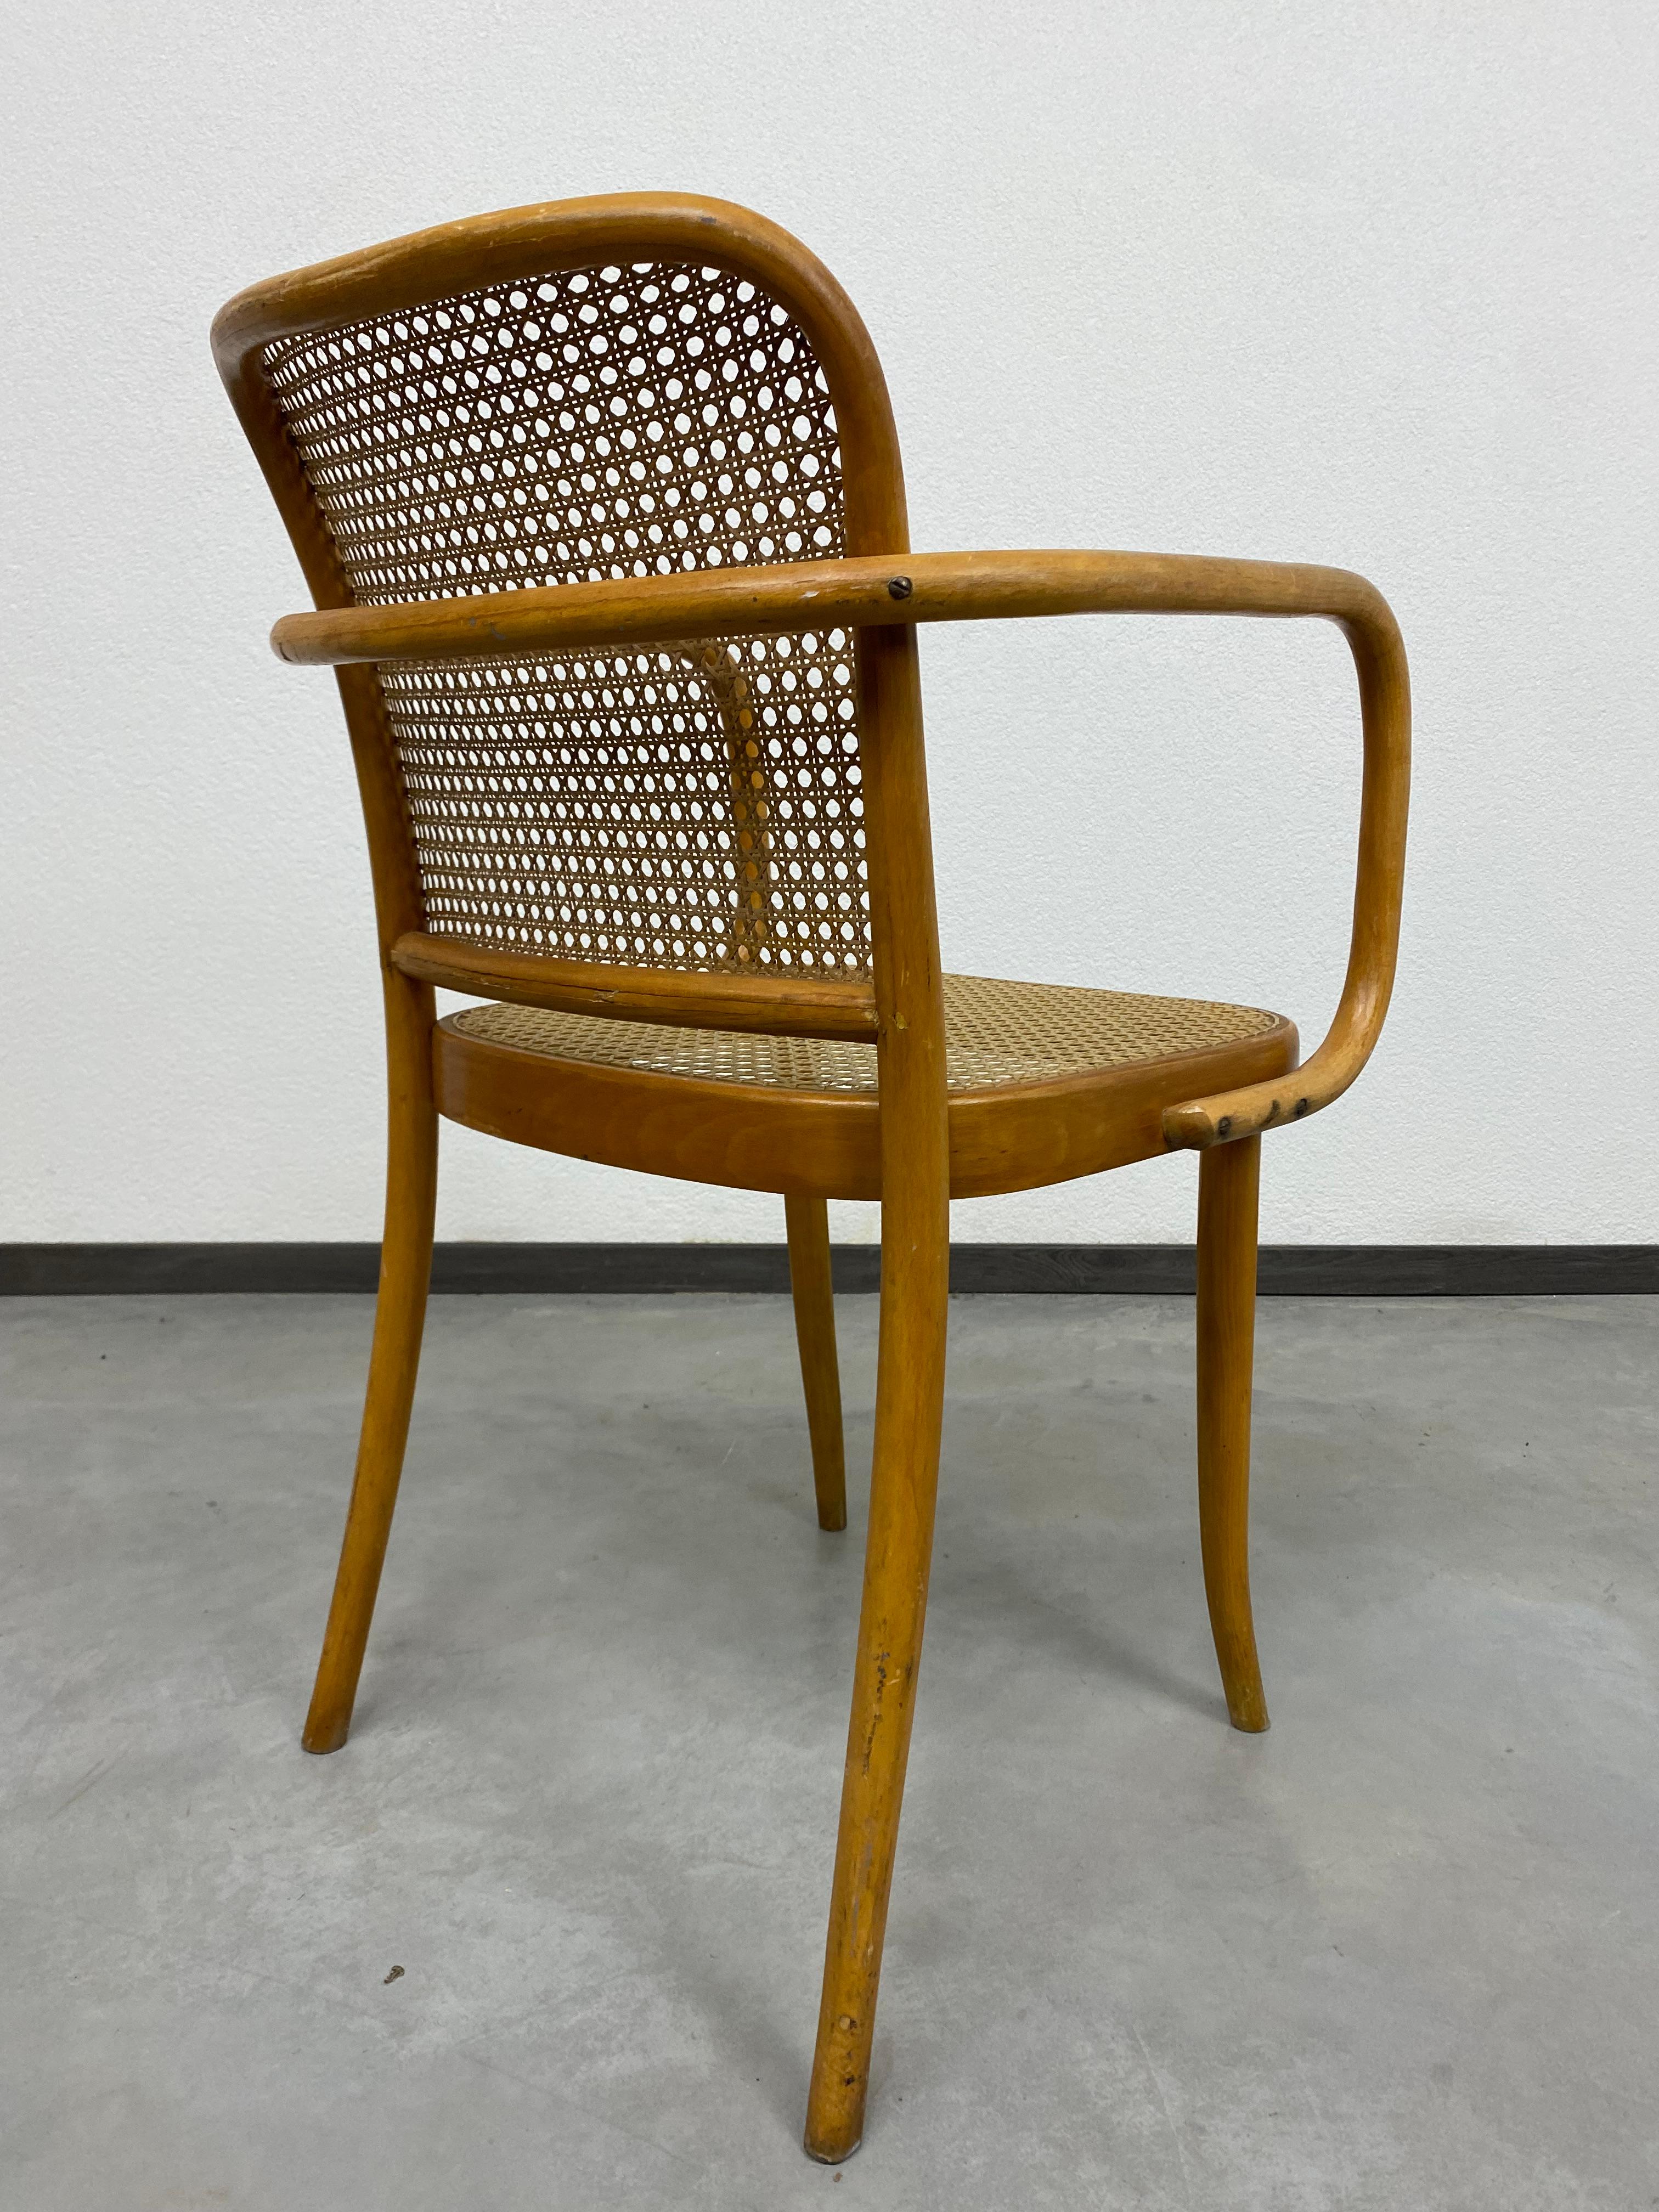 Office chair no.811 by Josef Hoffmann for Thonet. Combination or natural rattan and plastic handmade seats.